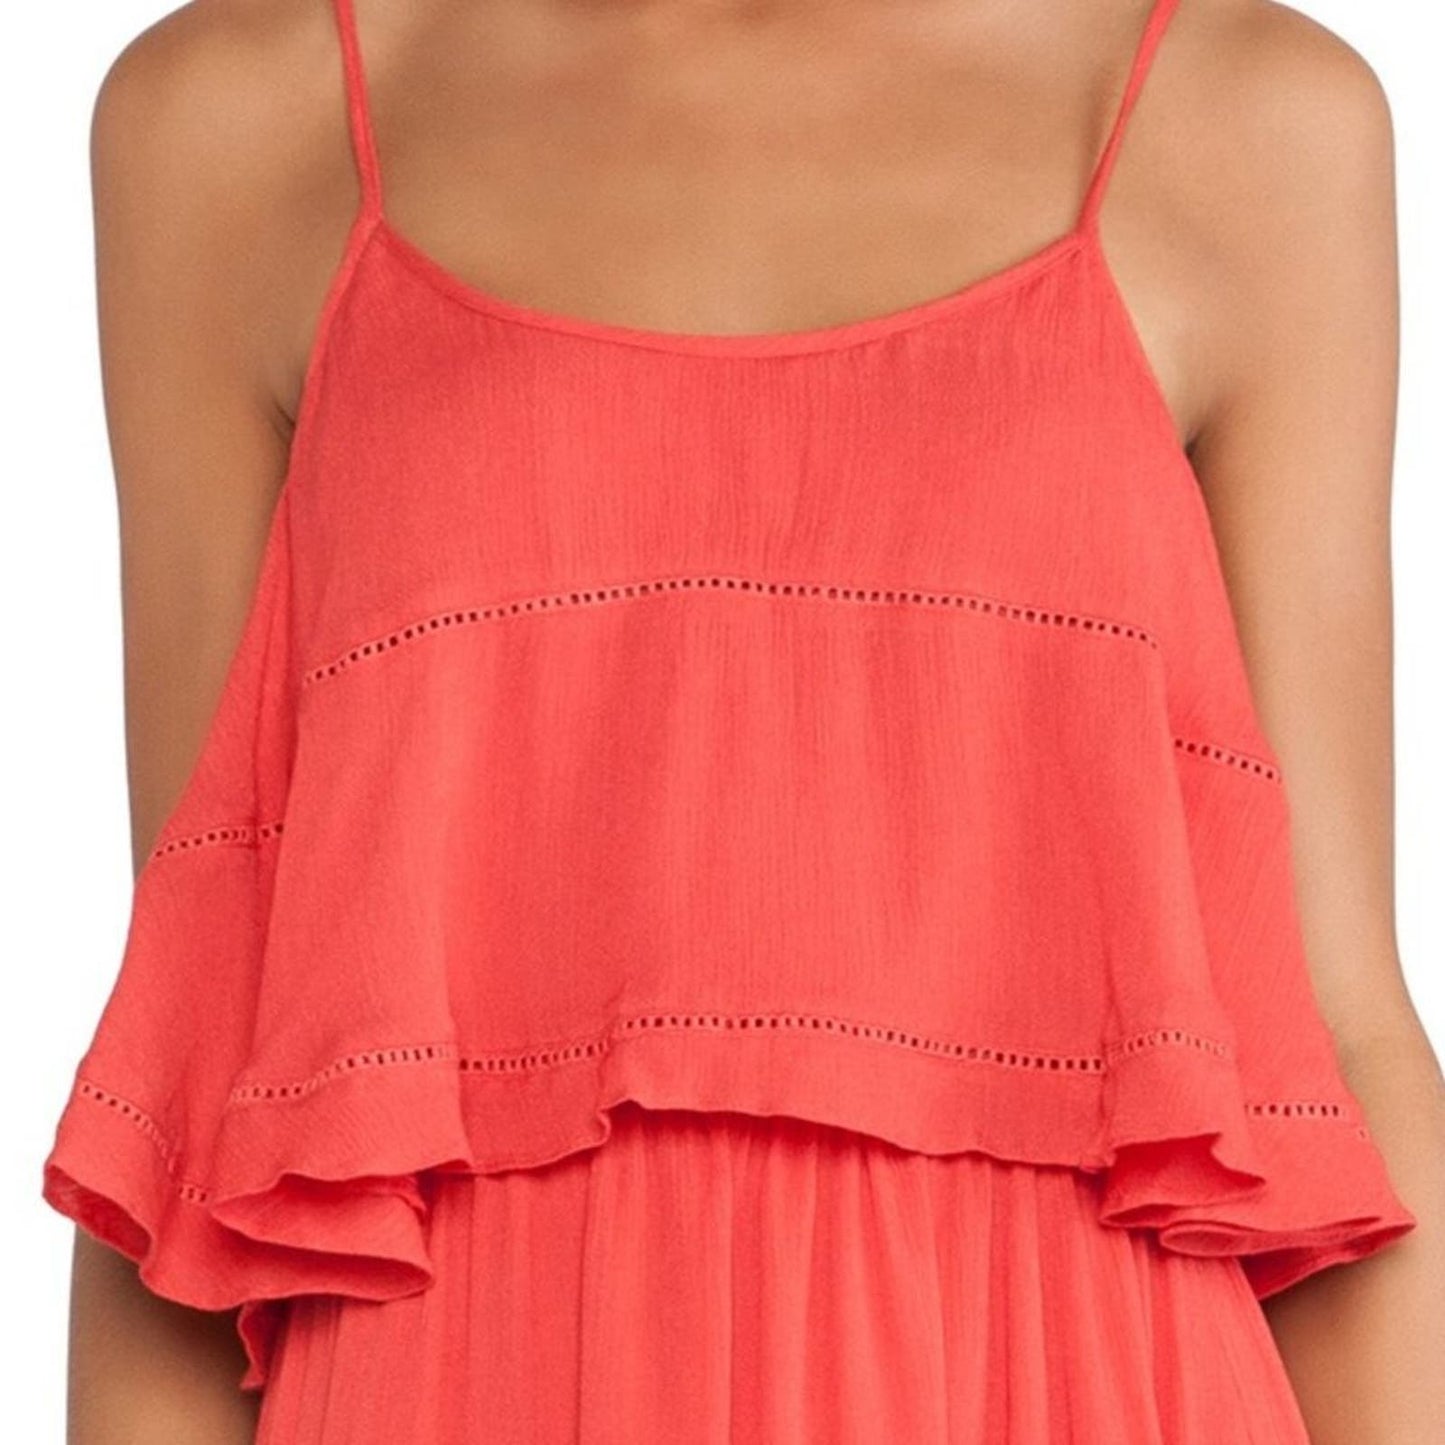 Lovers + Friends Paradise Bay Tiered Mini Dress in Coral NWT